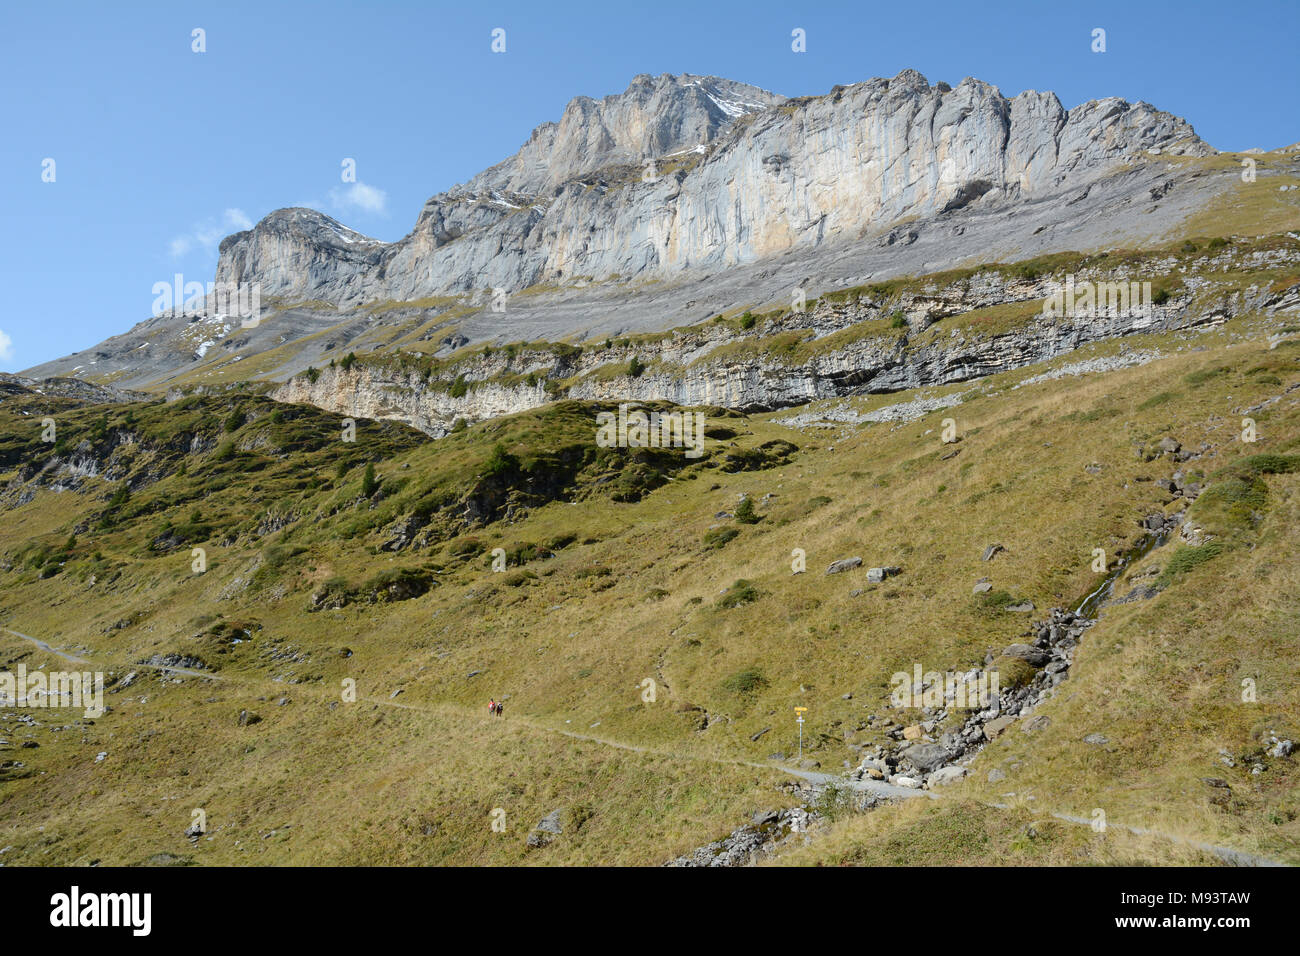 The Bernese-Oberland hiking route through the Gemmi Pass in the Bernese Alps near the Swiss alpine resort town of Leukerbad, Valais, Switzerland. Stock Photo